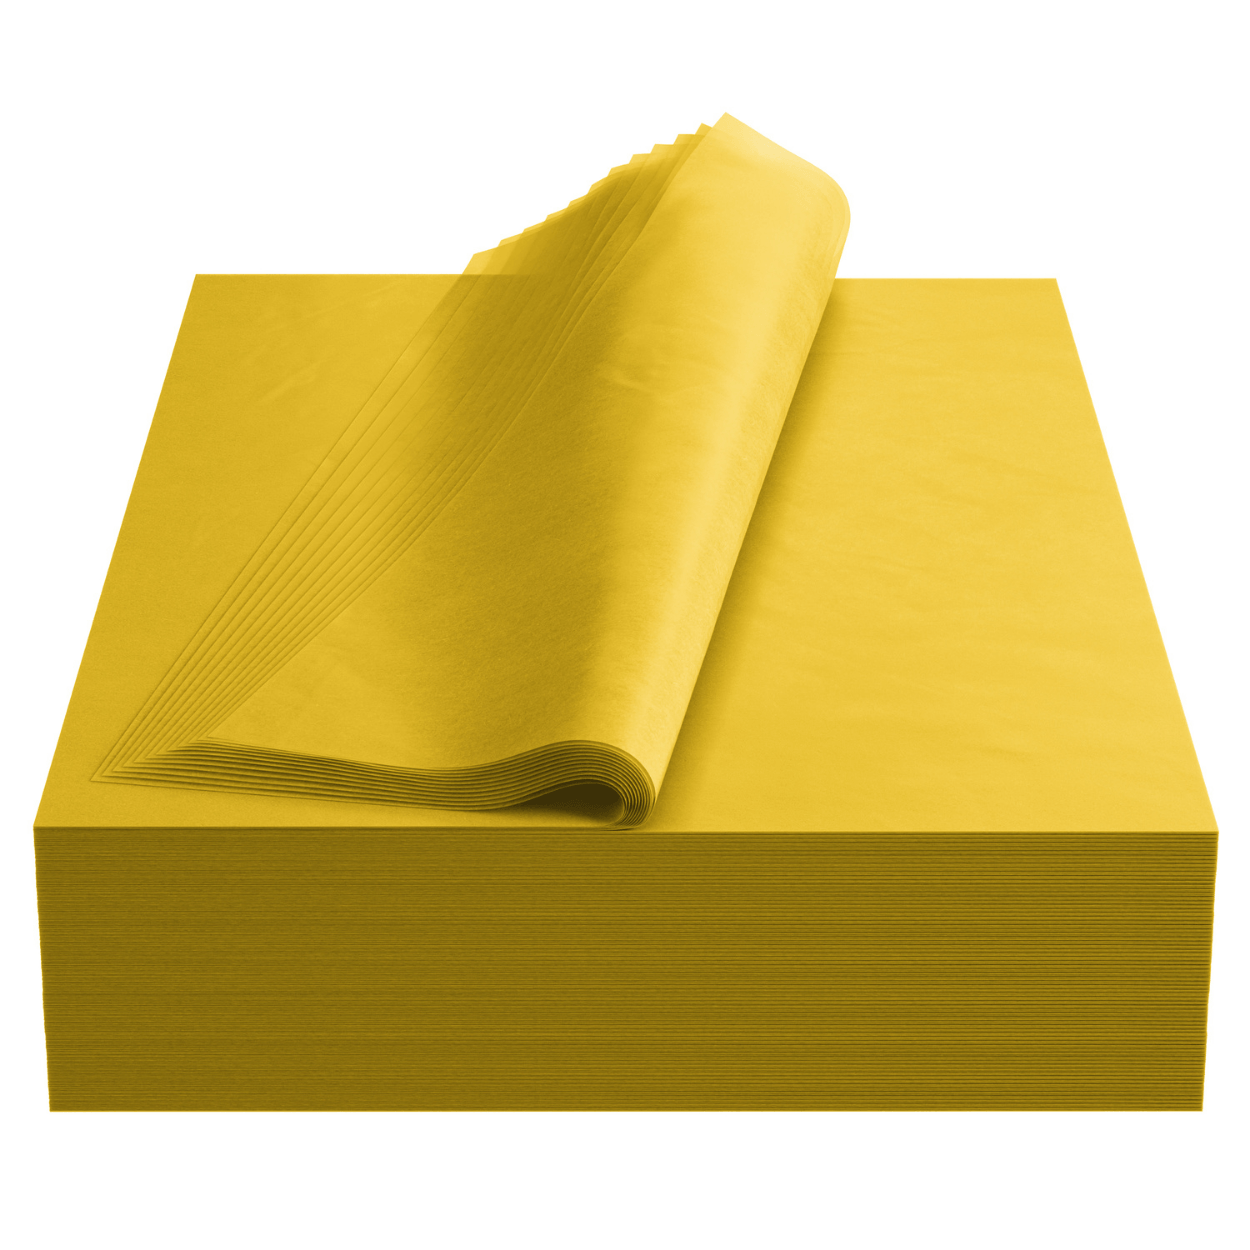 Gold Wrapping Sheets 20x30 inch - Case Qty. (2400 Sheets)